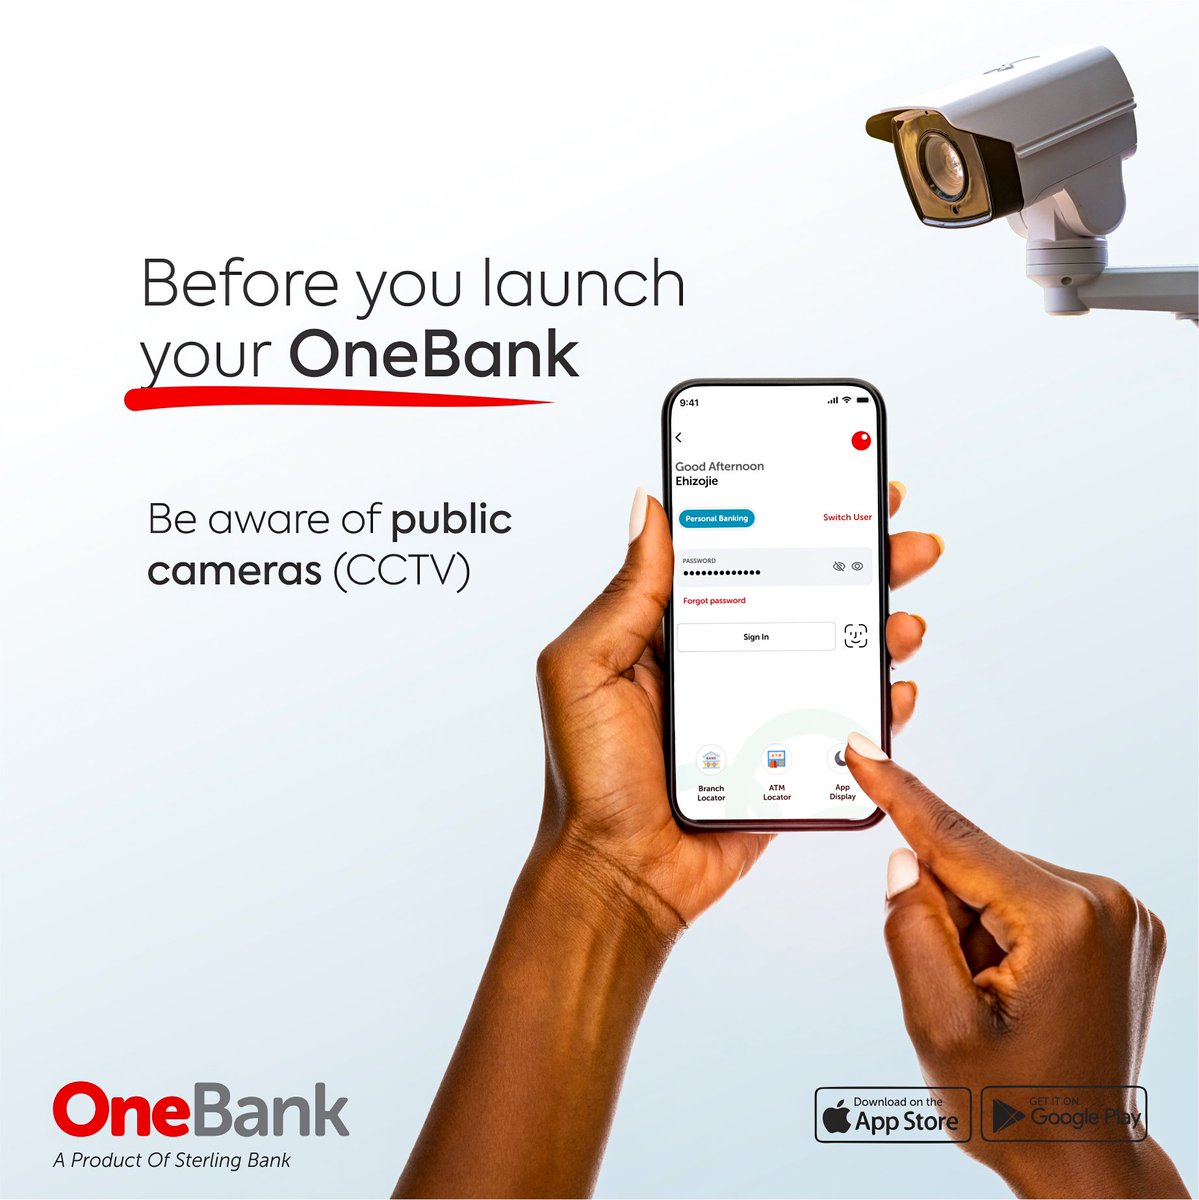 Before using your OneBank app, beware of public cameras to ensure the safety of your account. #OneBank #OneBankBySterling #ANewWayToLive